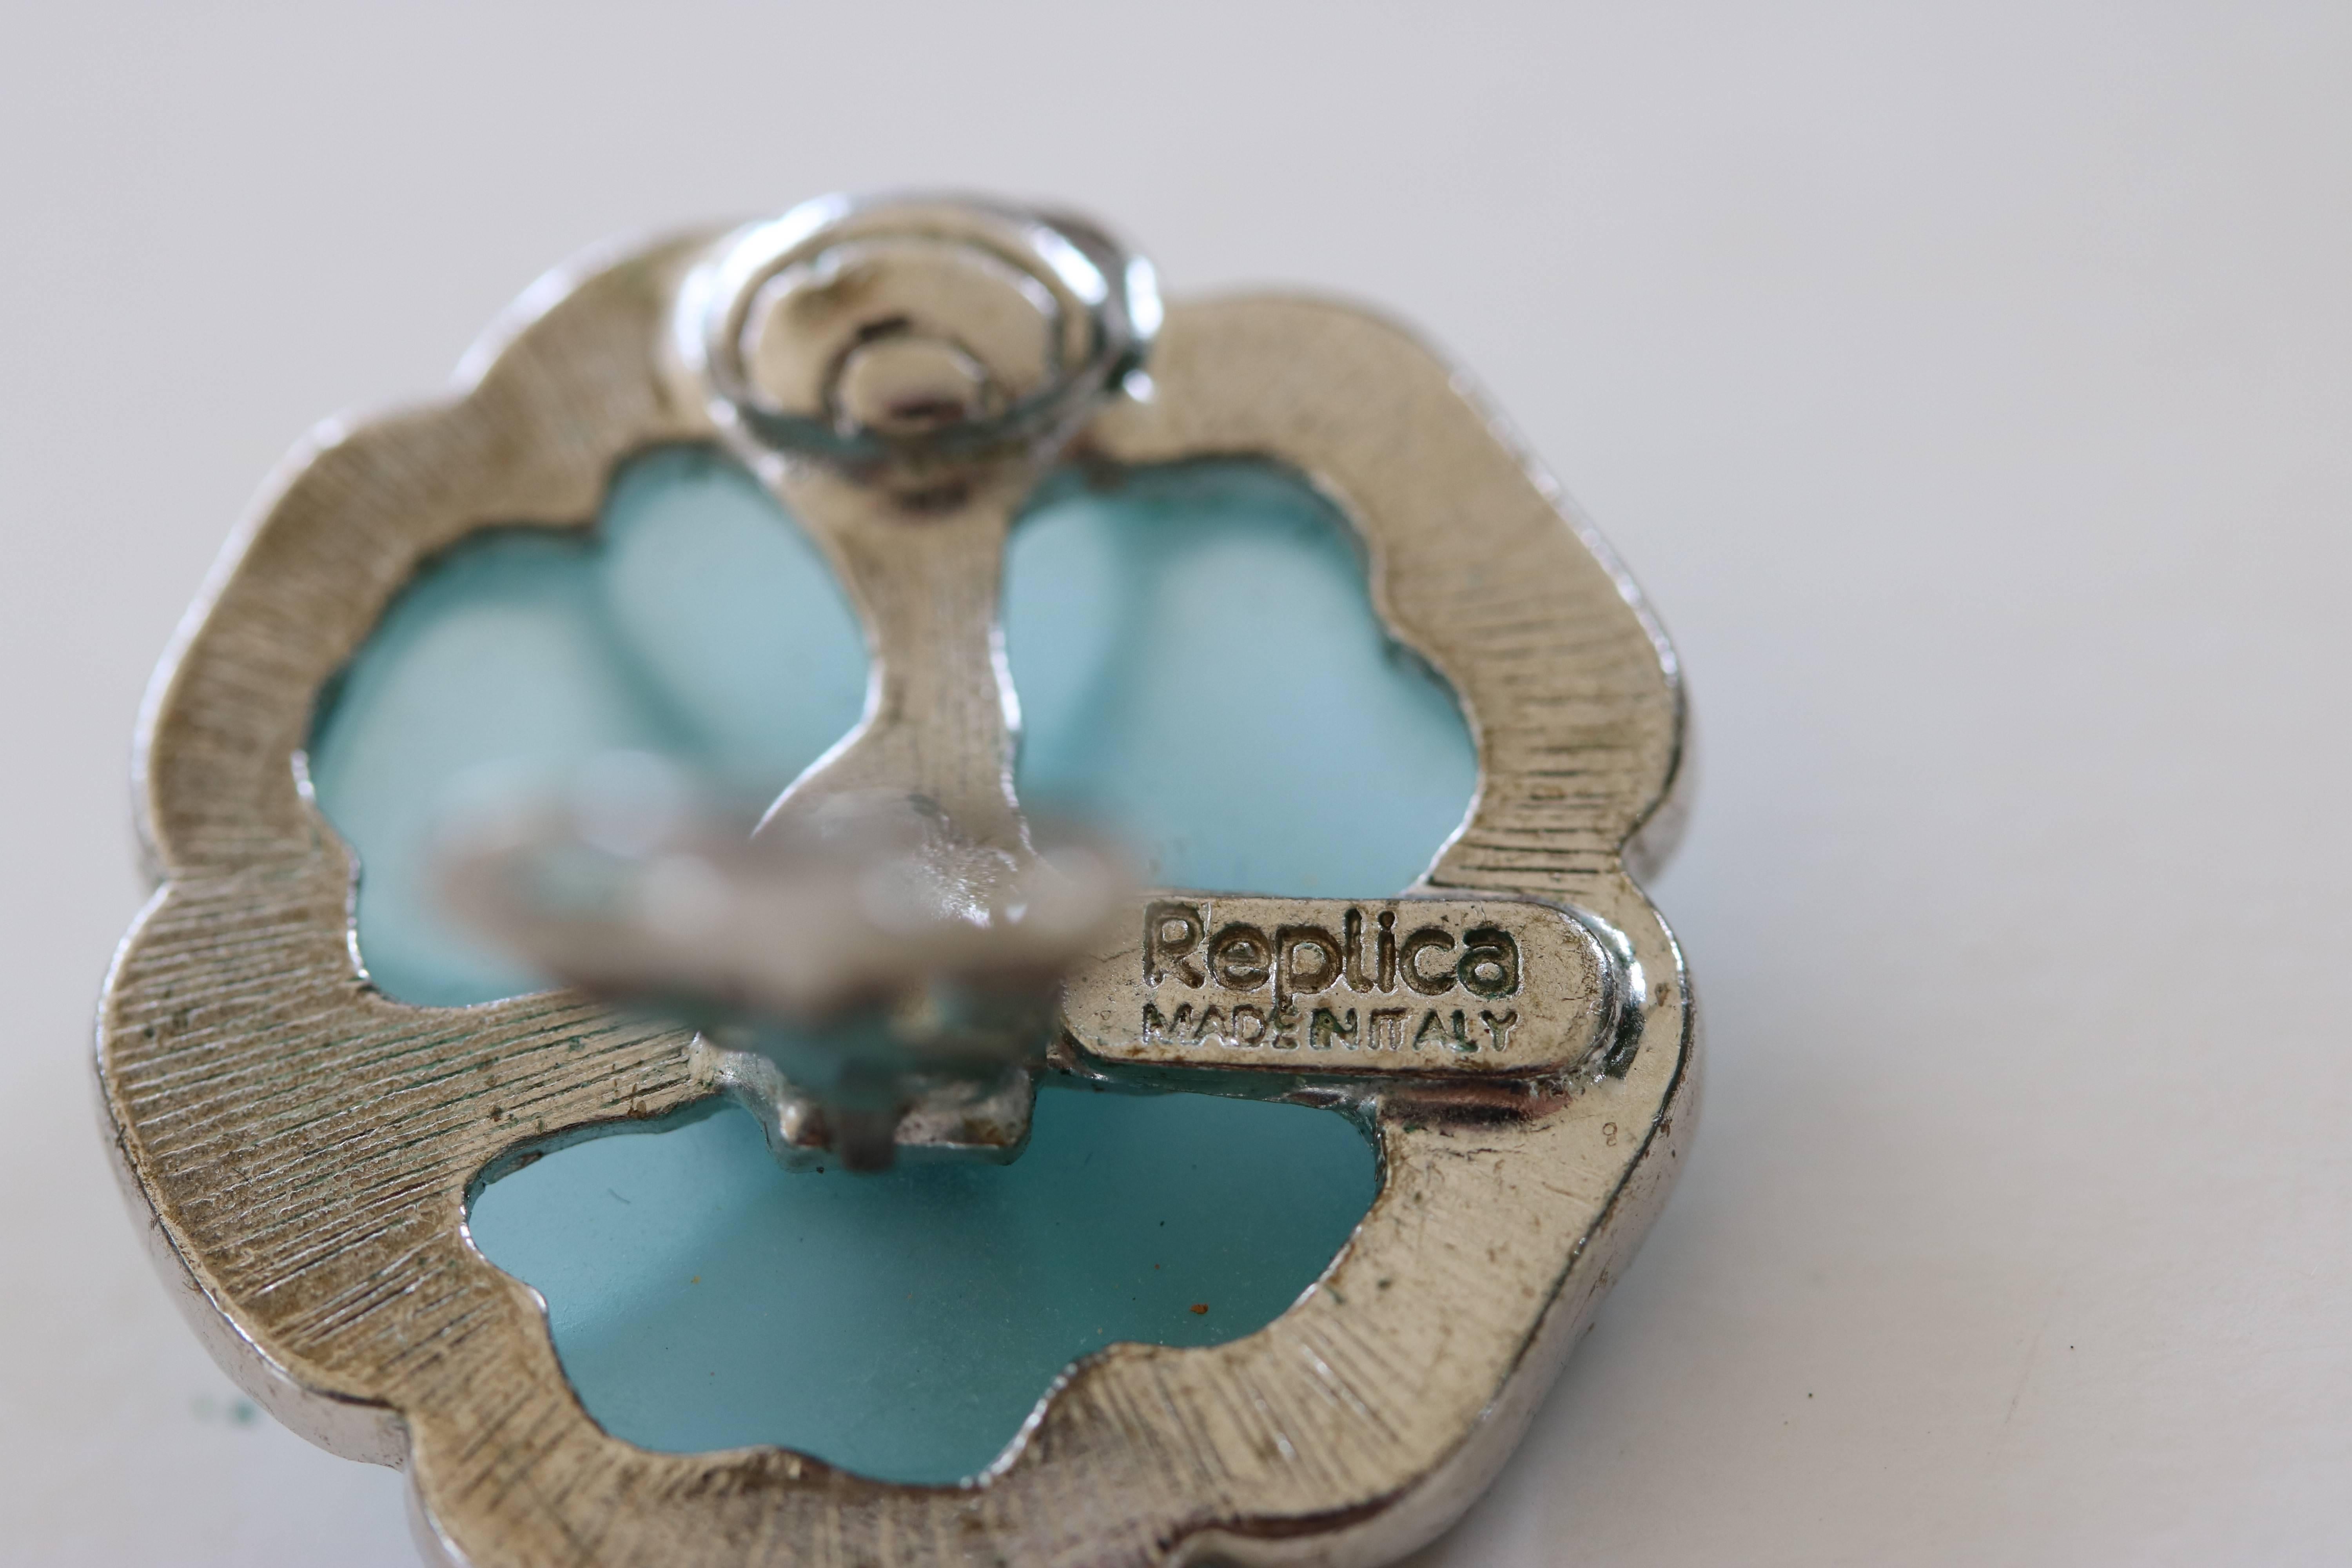 1980s stunning pair of Italian earrings Lalique Style in flower form with translucent aqua glass in silver plate metal with a CZ border and center by Republica.


